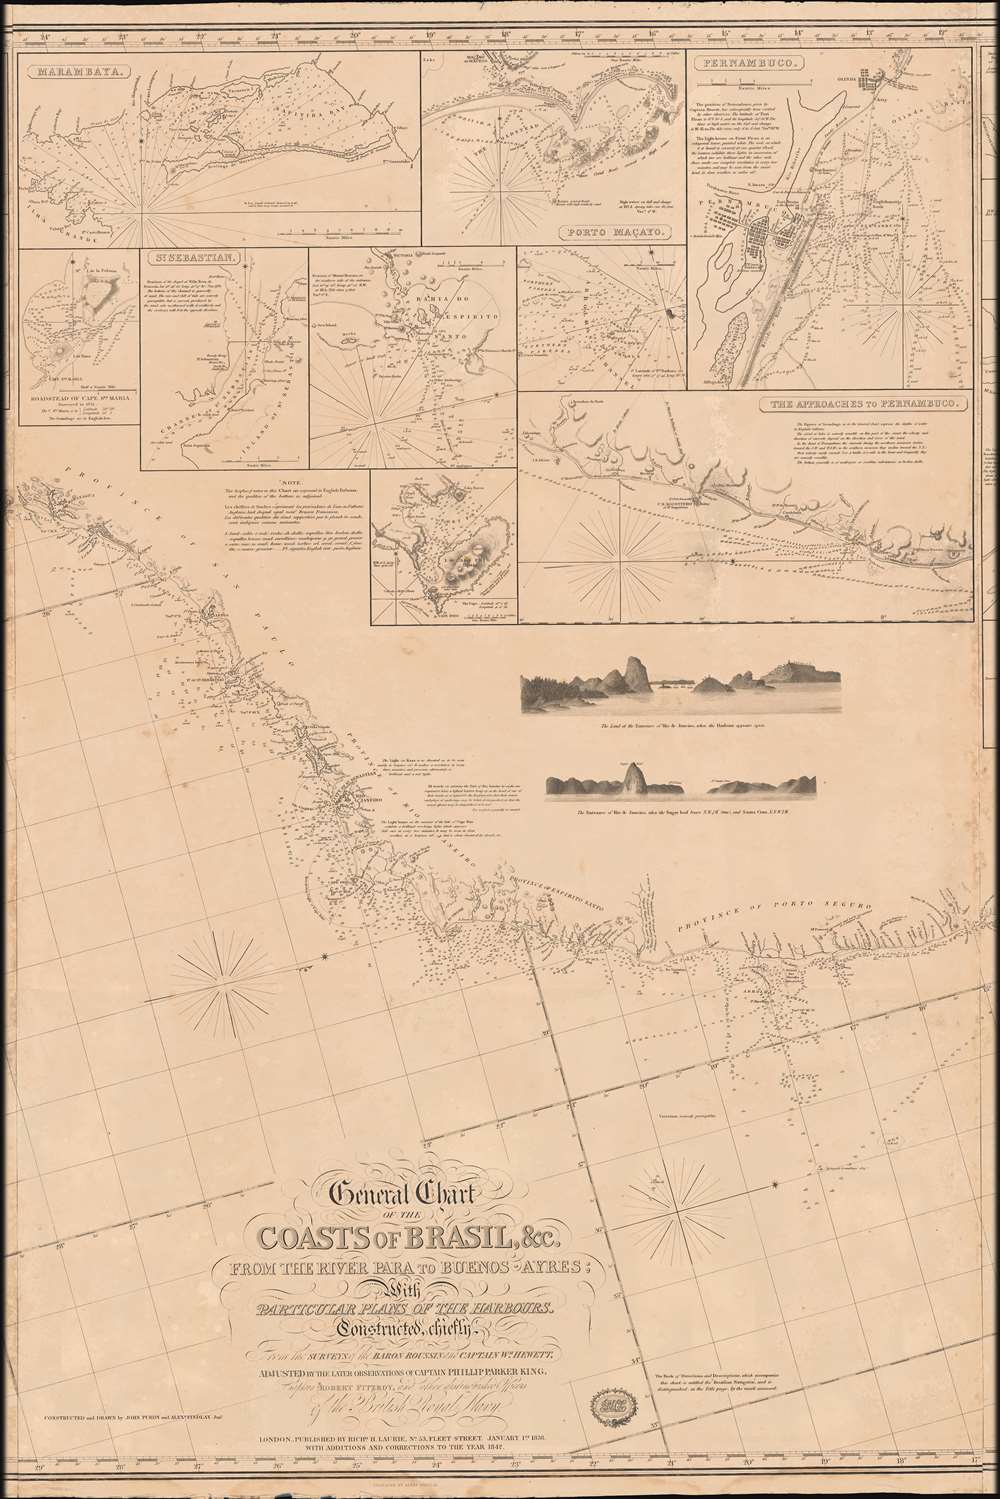 General Chart of the Coasts of Brazil, and c. From the River para to Buenos-Ayres; with Particular Plans of the Harbours. - Alternate View 3